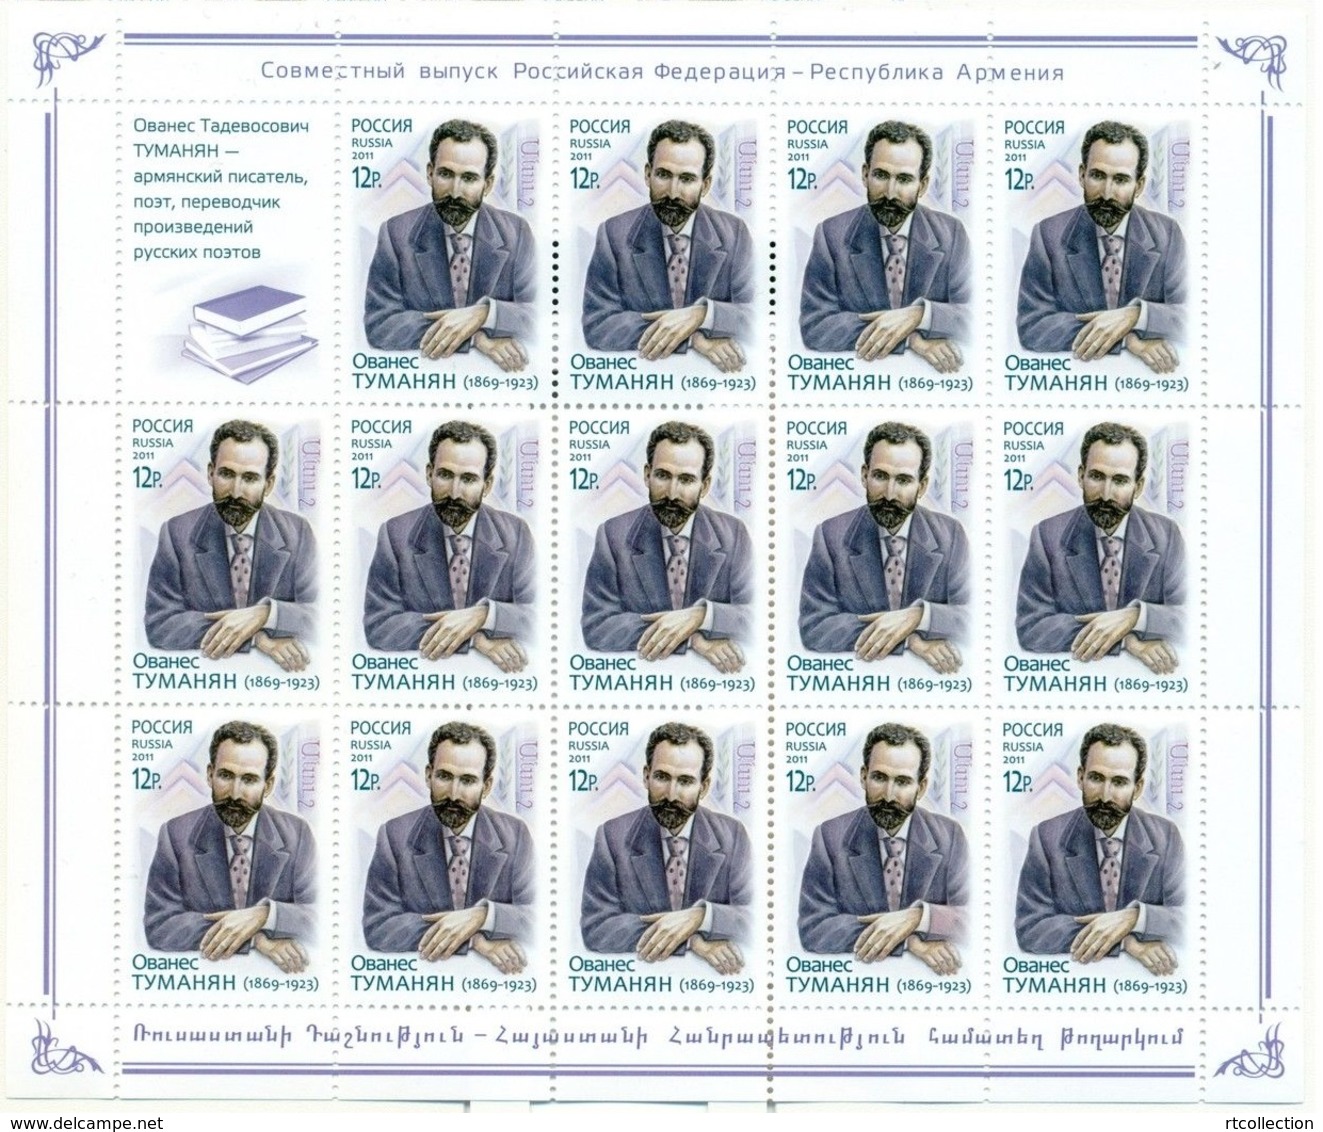 Russia 2011 Sheet Personalities Joint Issue With Armenia Famous People Ovanes Tumanian Writer 1869-1935 Stamps MNH - Feuilles Complètes